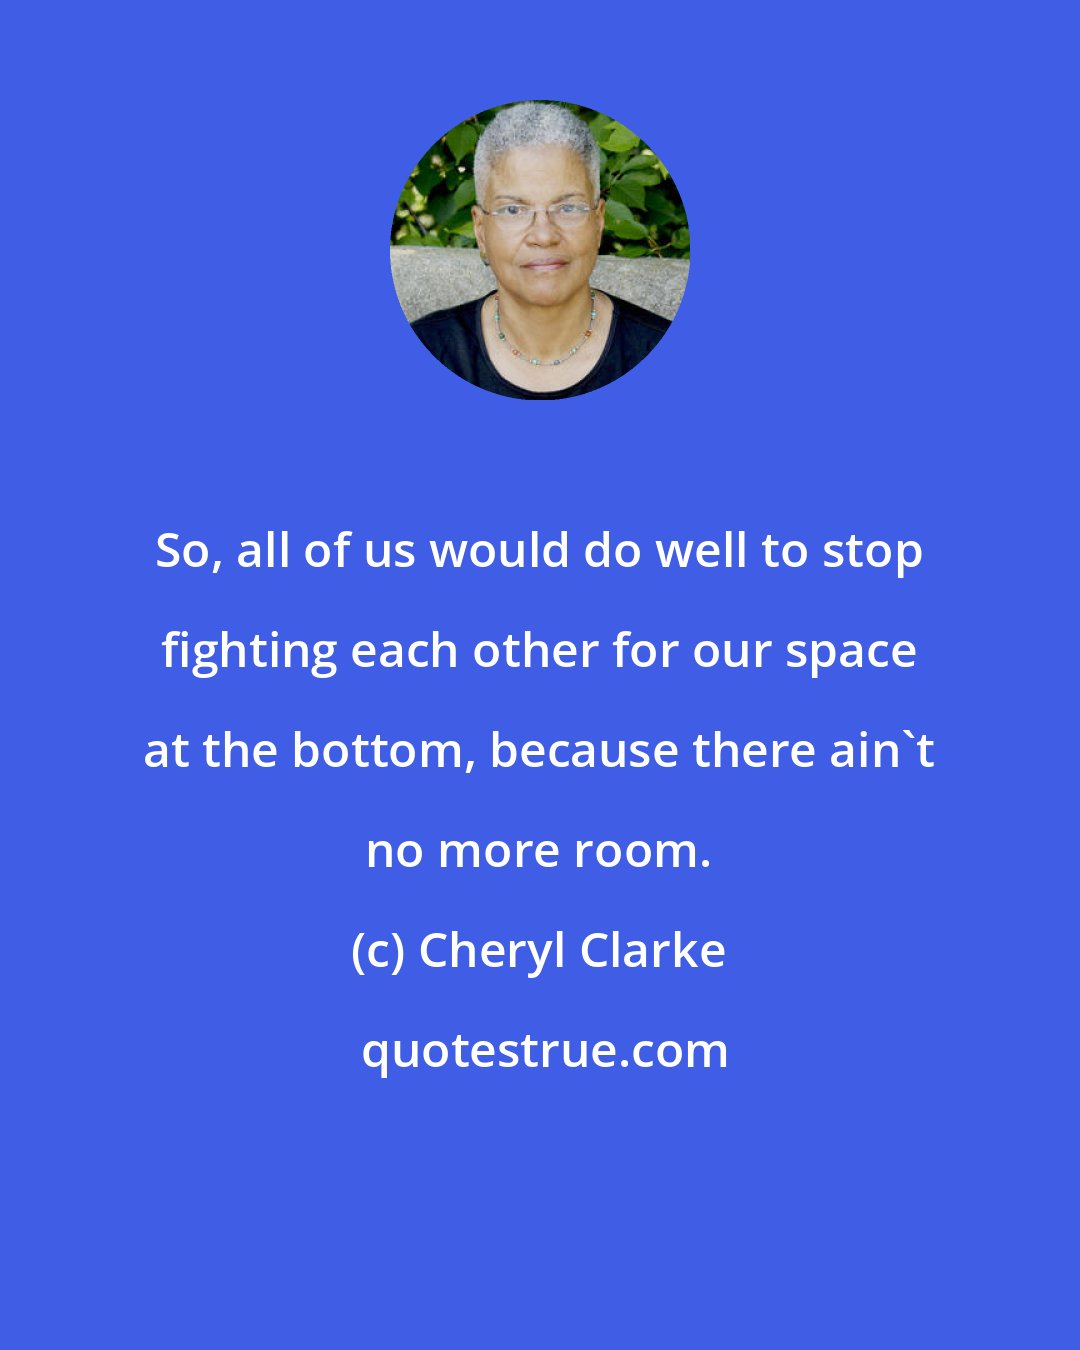 Cheryl Clarke: So, all of us would do well to stop fighting each other for our space at the bottom, because there ain't no more room.